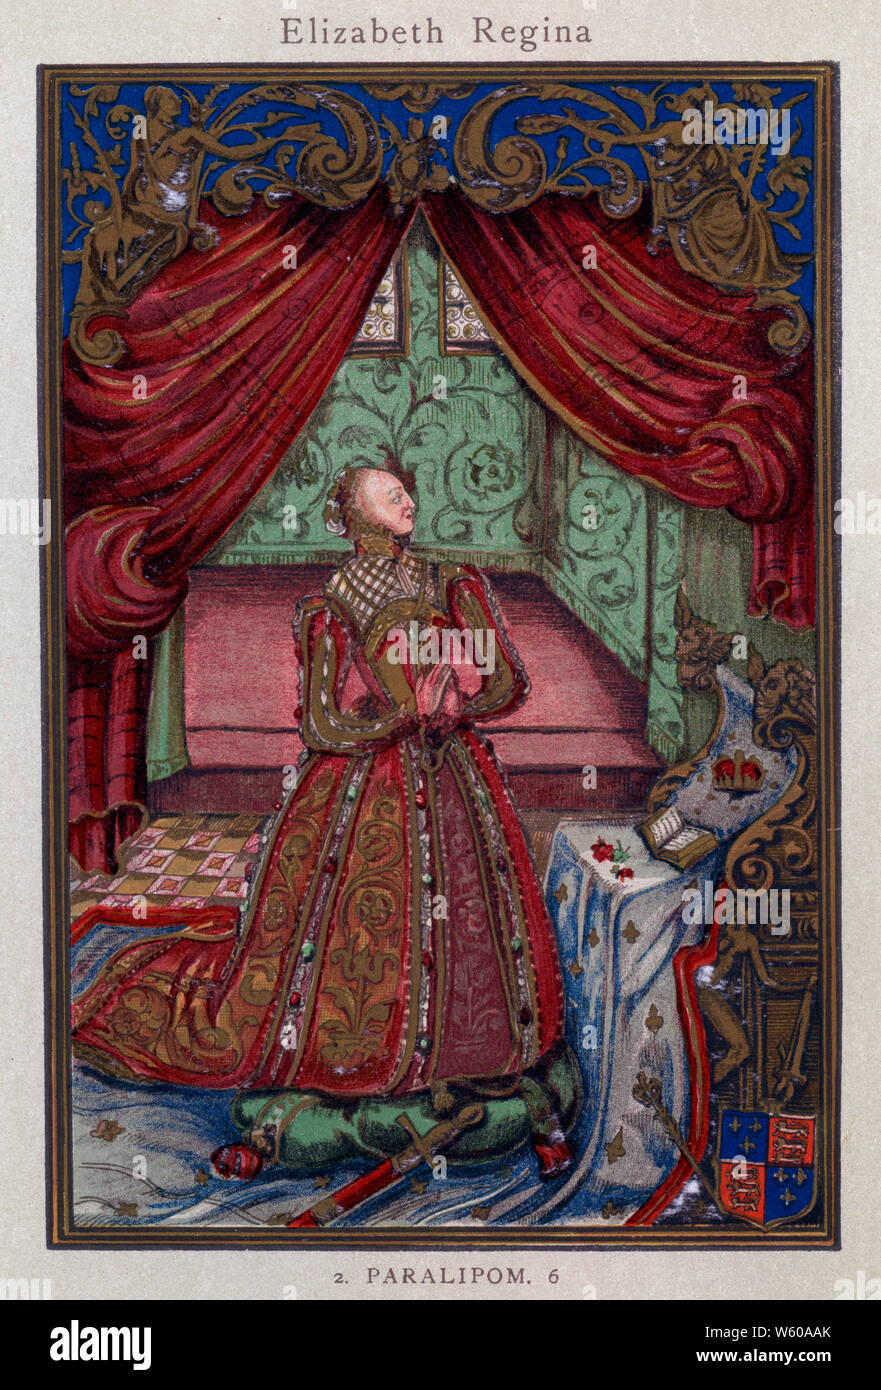 Queen Elizabeth at Prayer, frontispiece to 'Christian Prayers and Mediations', 1569. Stock Photo